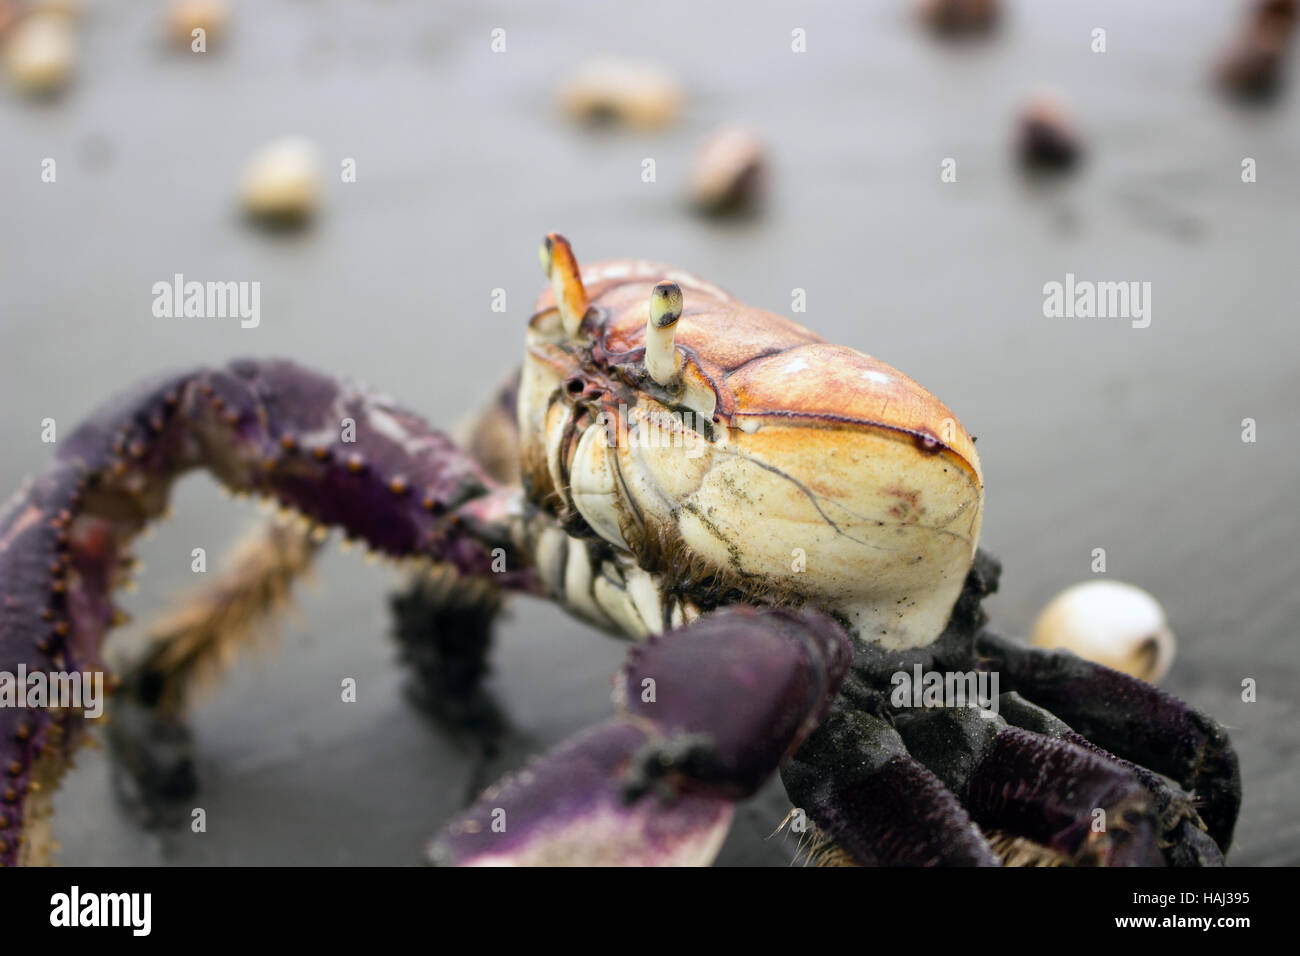 Mangrove crab (Ucides cordatus) known as 'caraguejo uçá' walking on the beach with seashells Stock Photo